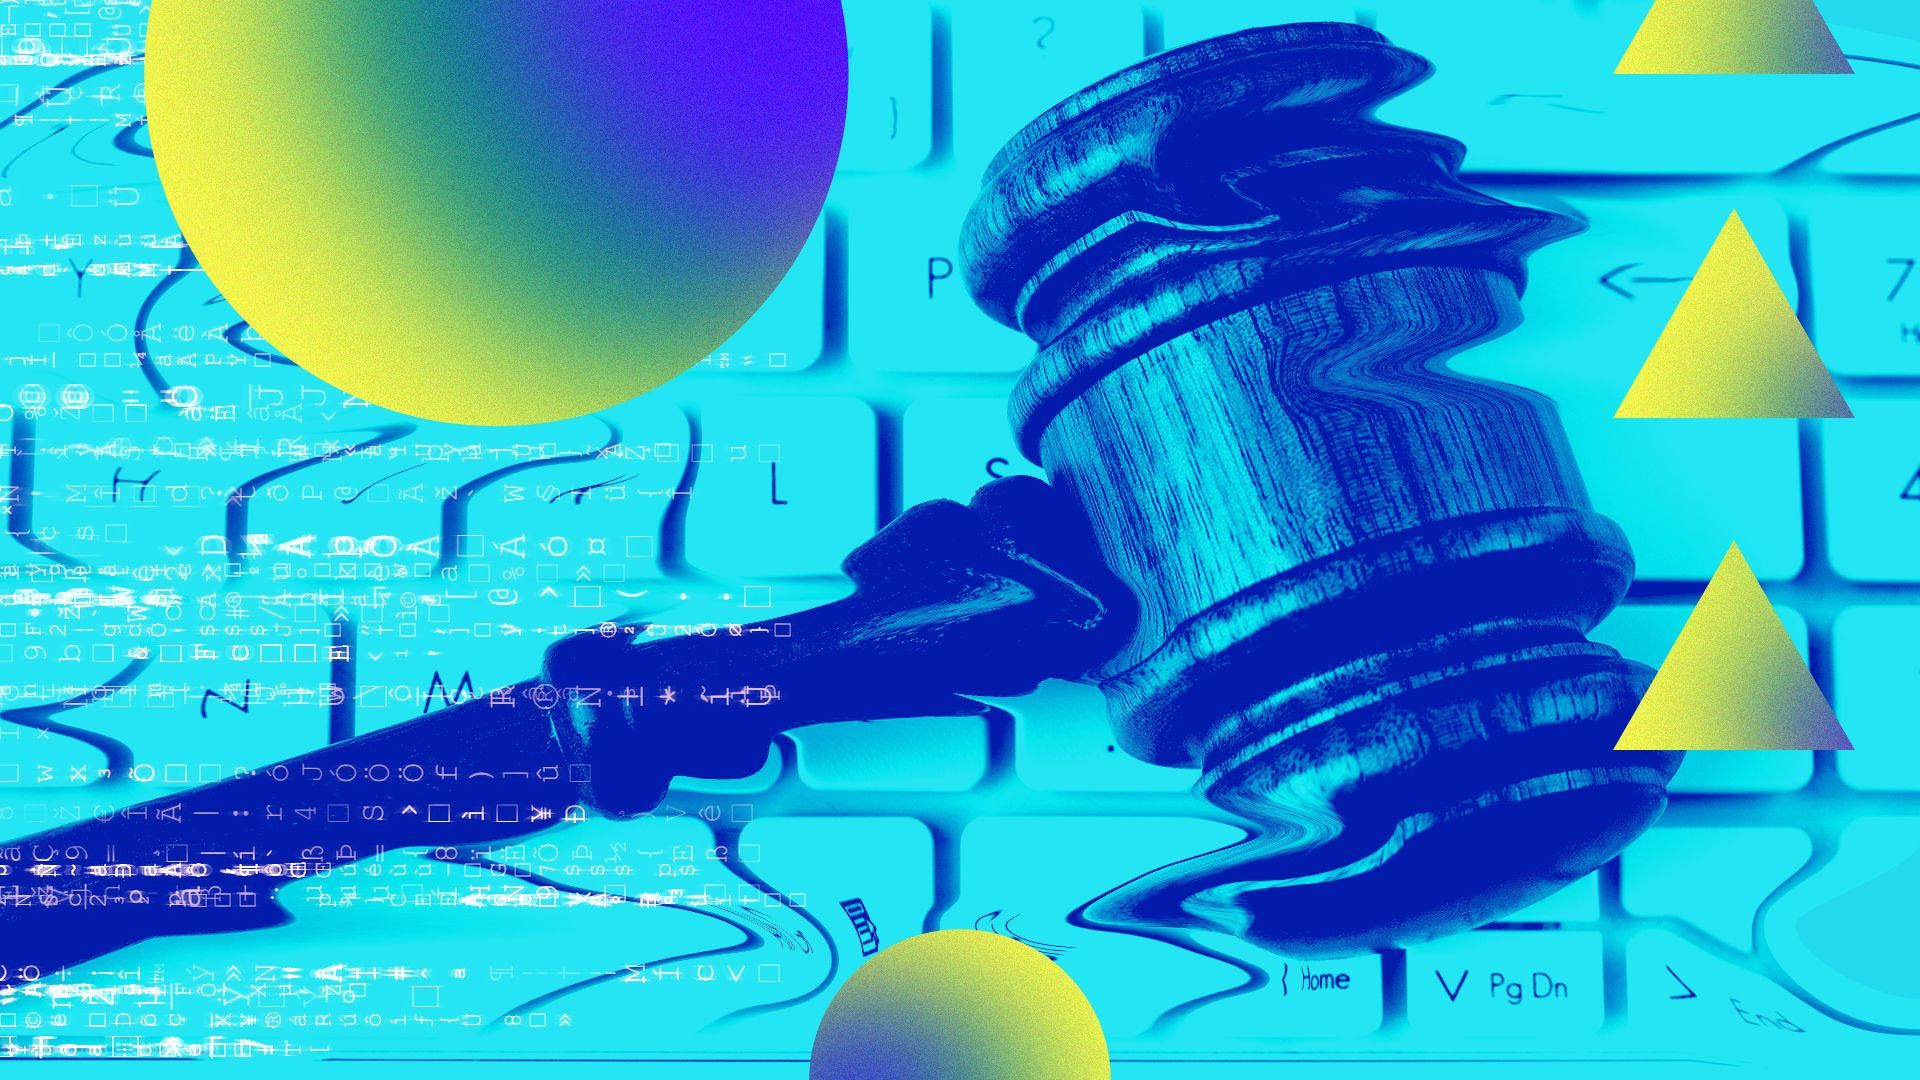 Illustration of a distorted gavel and keyboard, with abstract shapes around them.